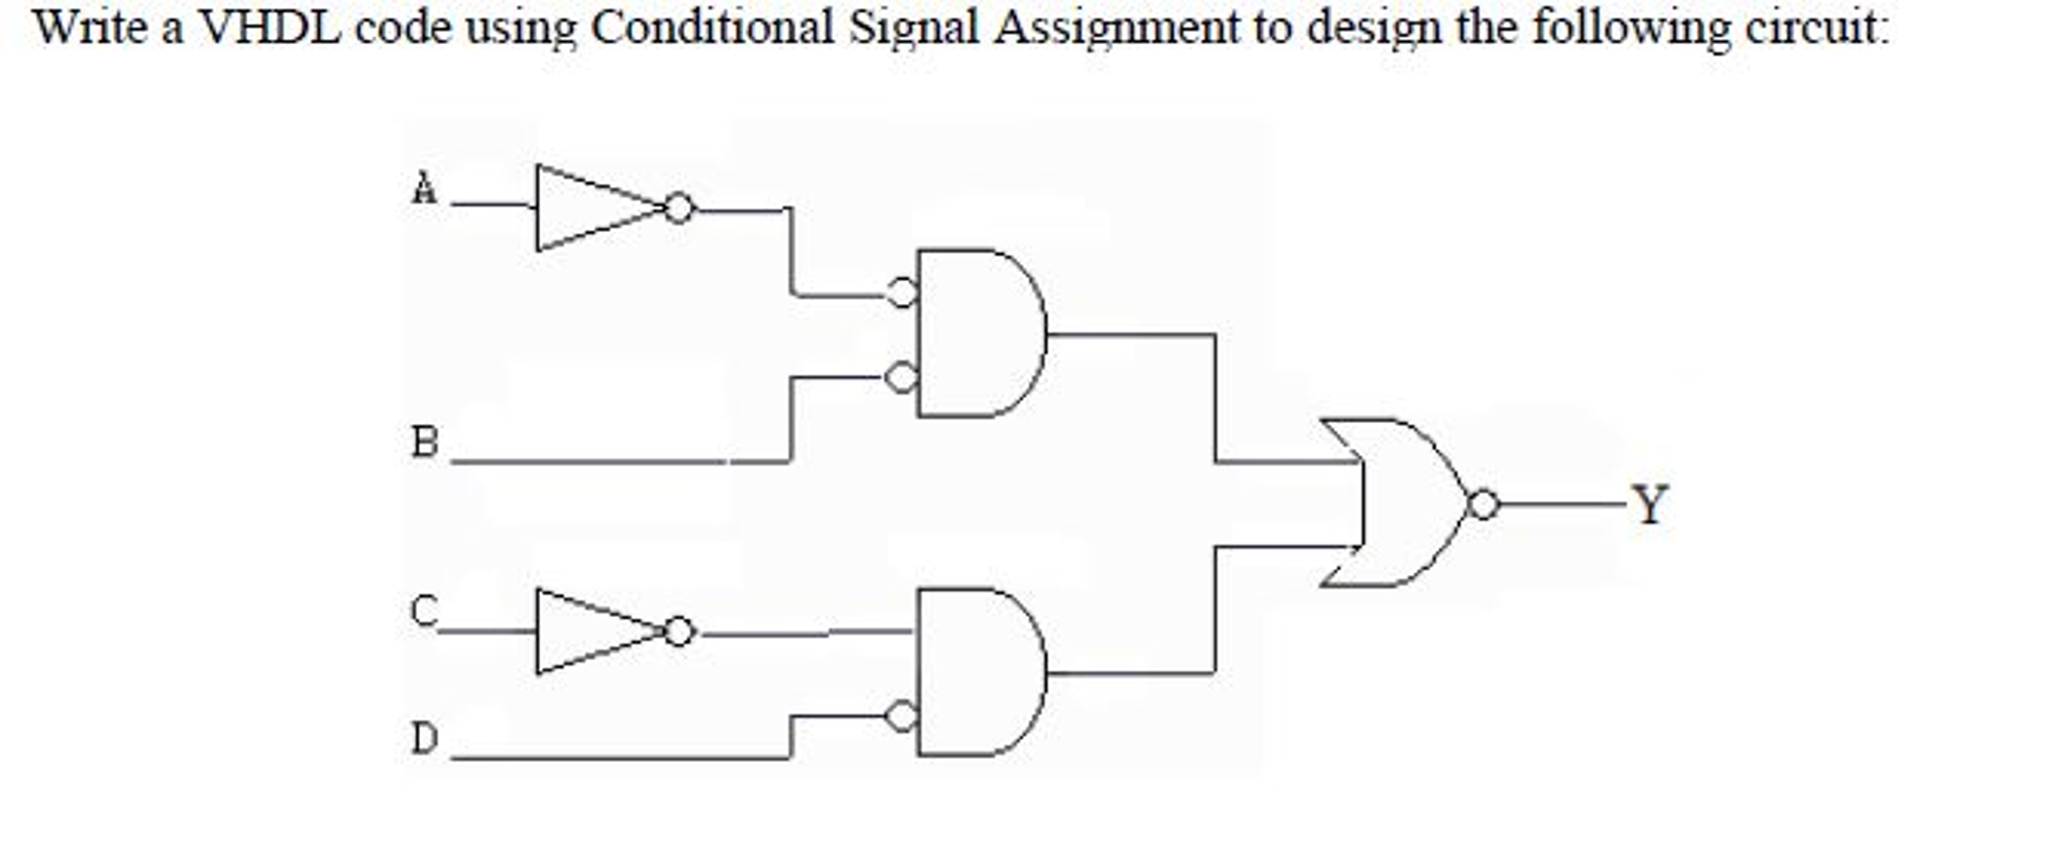 conditional signal assignment in vhdl